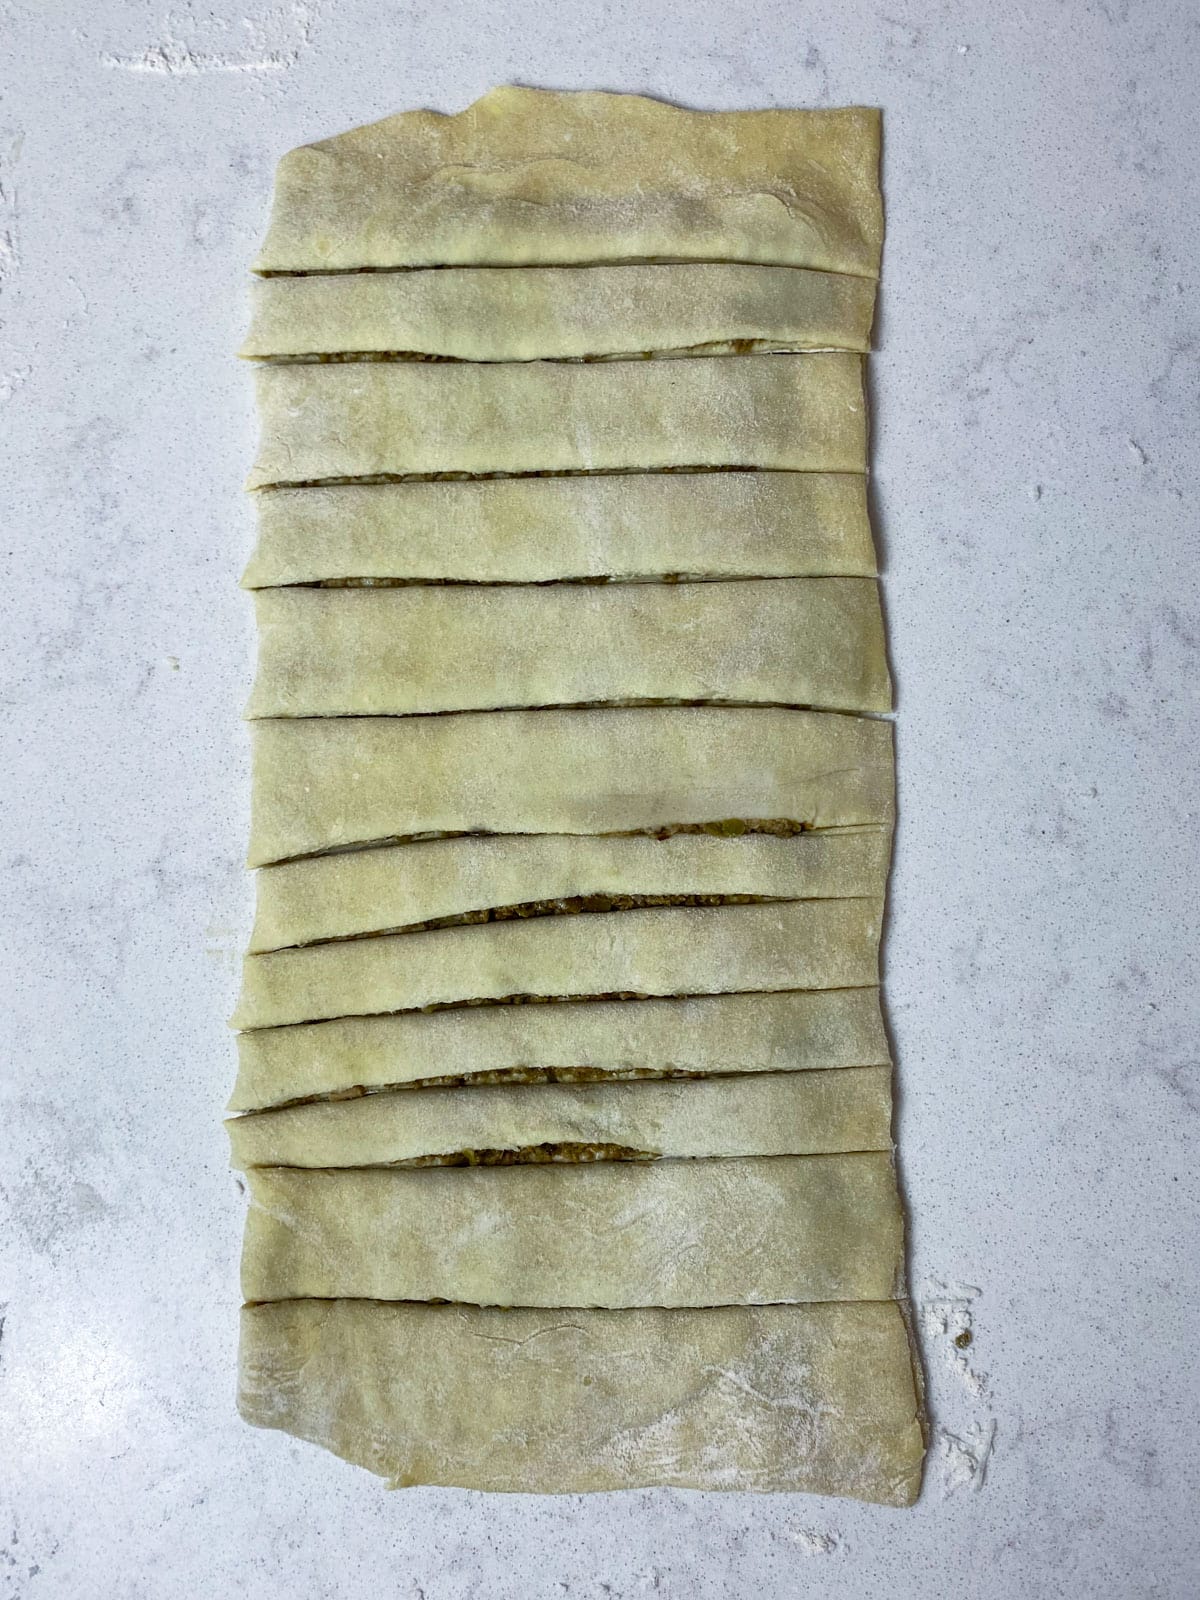 Cut long strips into the puff pastry.